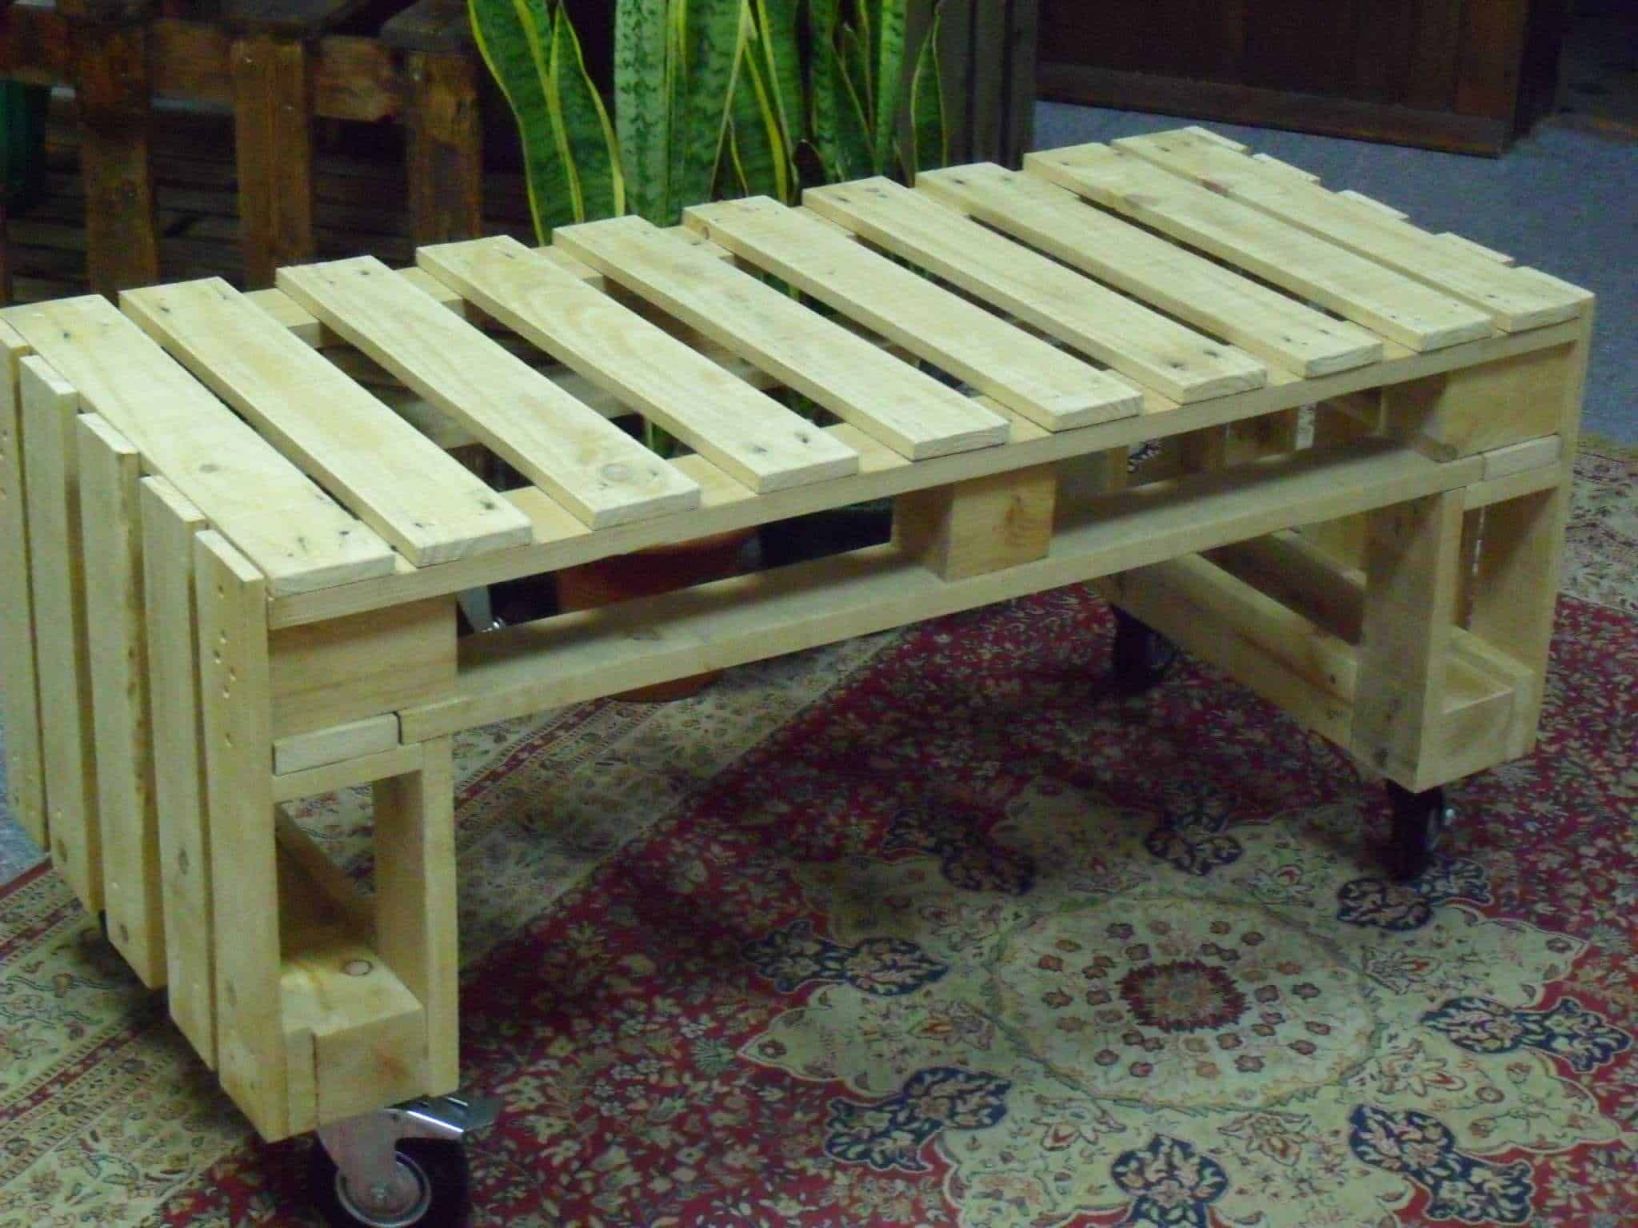  Cool simple pallet furniture 